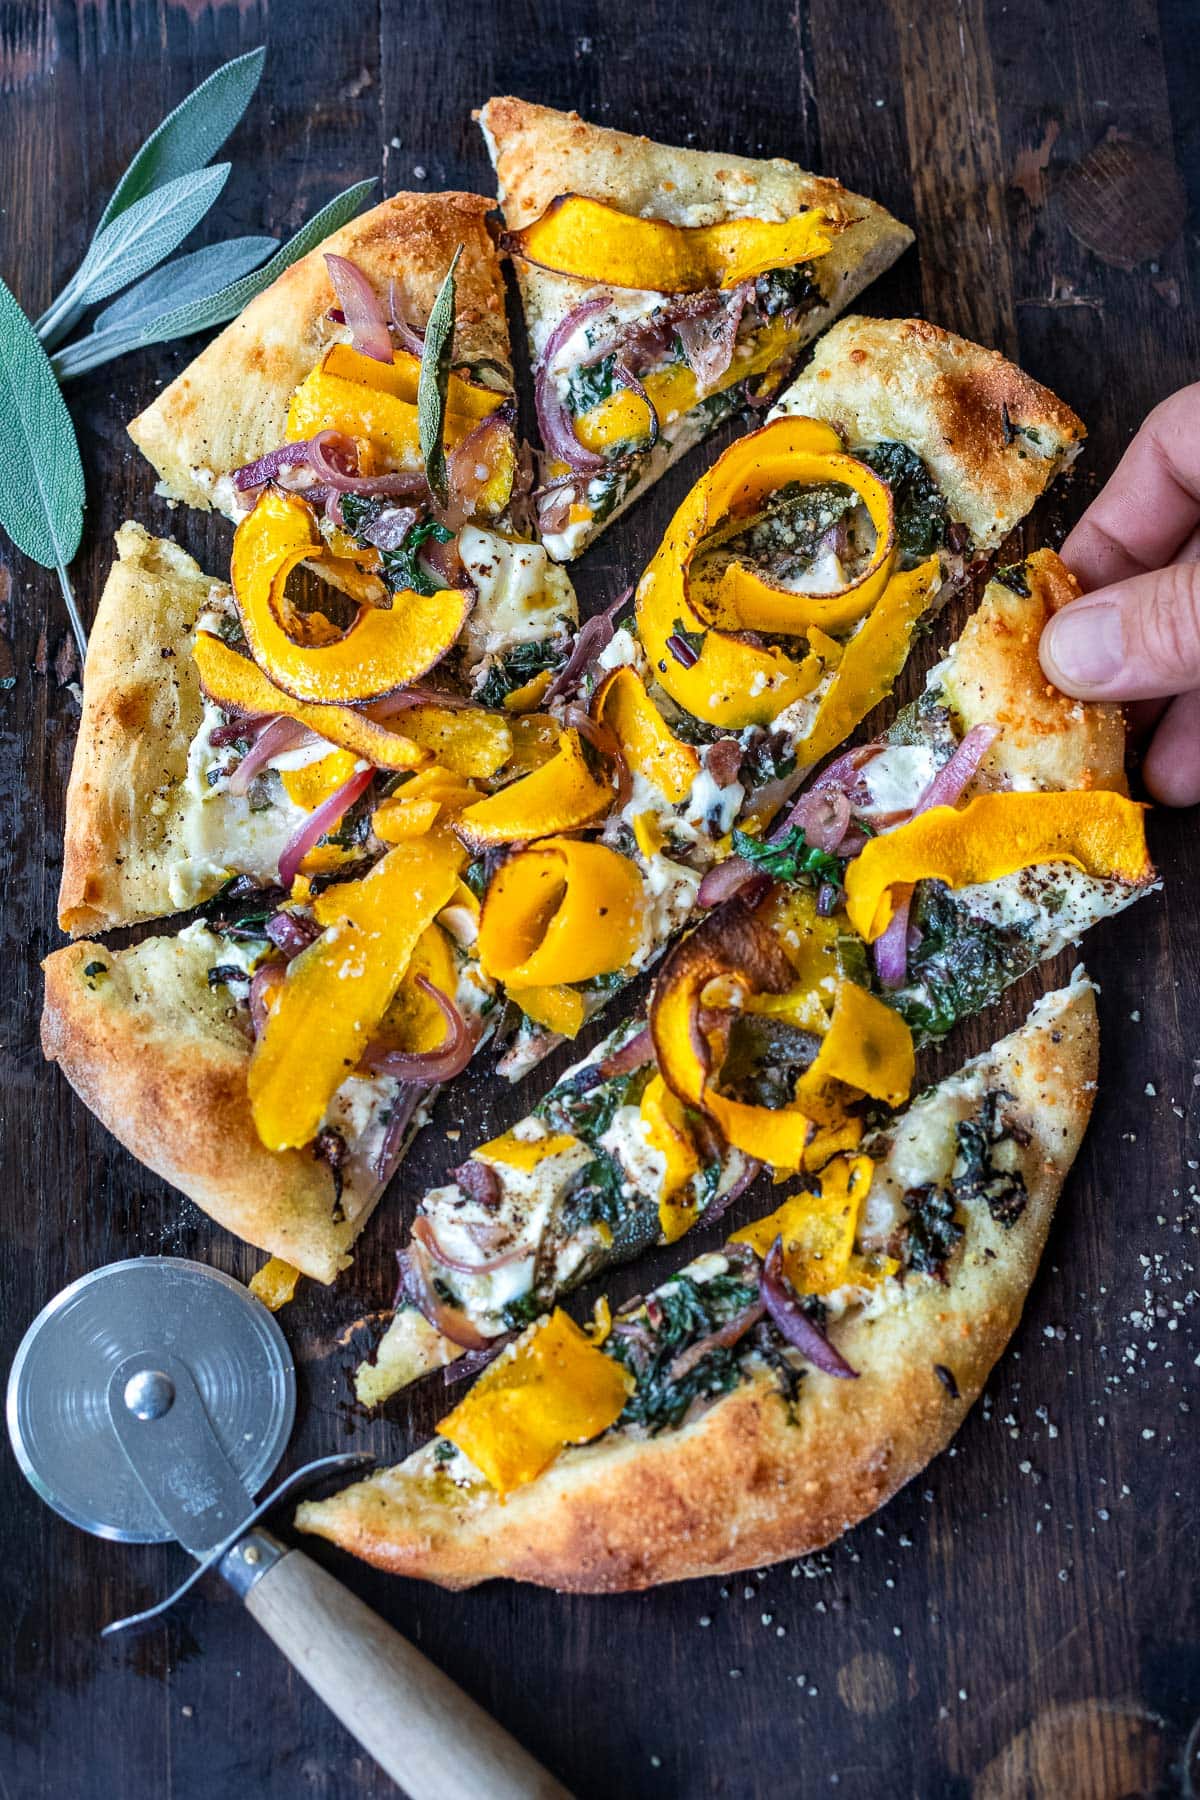 A delicious fall-inspired pizza topped with butternut squash ribbons, sage, caramelized onions, swiss chard and burrata cheese. Cozy fall flavors make the perfect bite! 